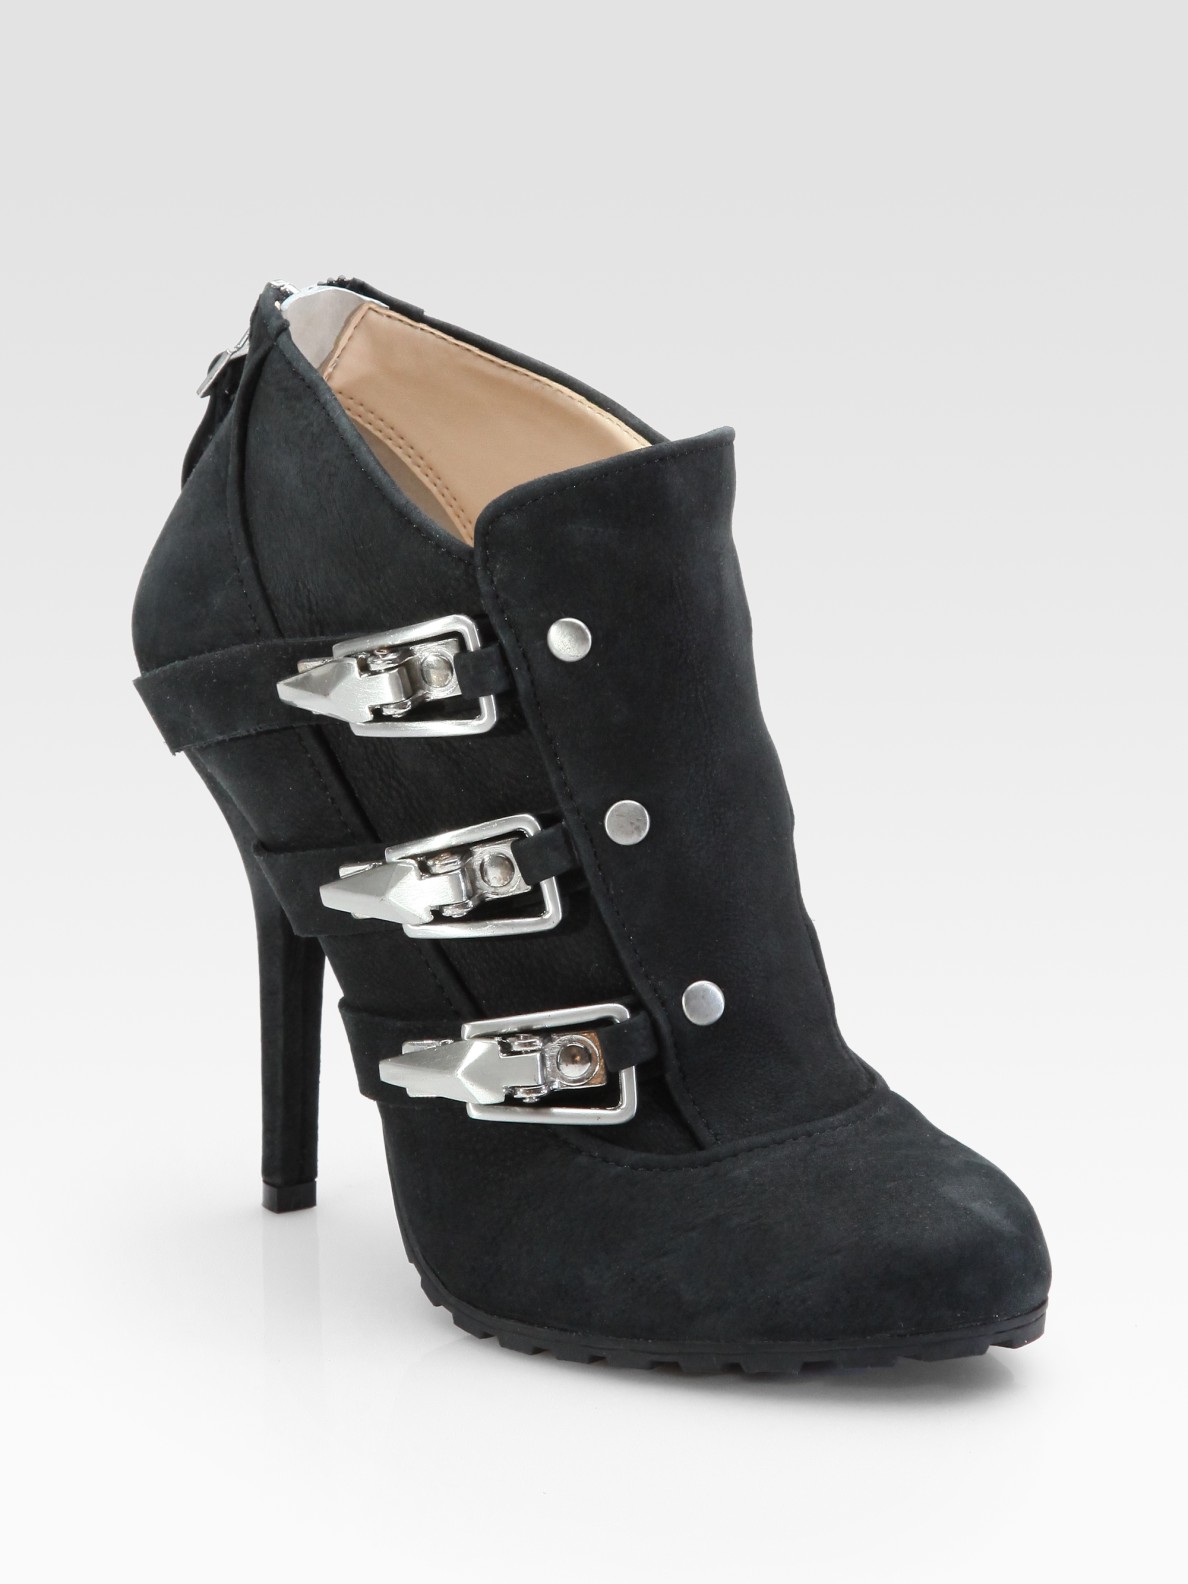 Lyst - Boutique 9 Bondina Suede Ski-clasp Ankle Boots in Black